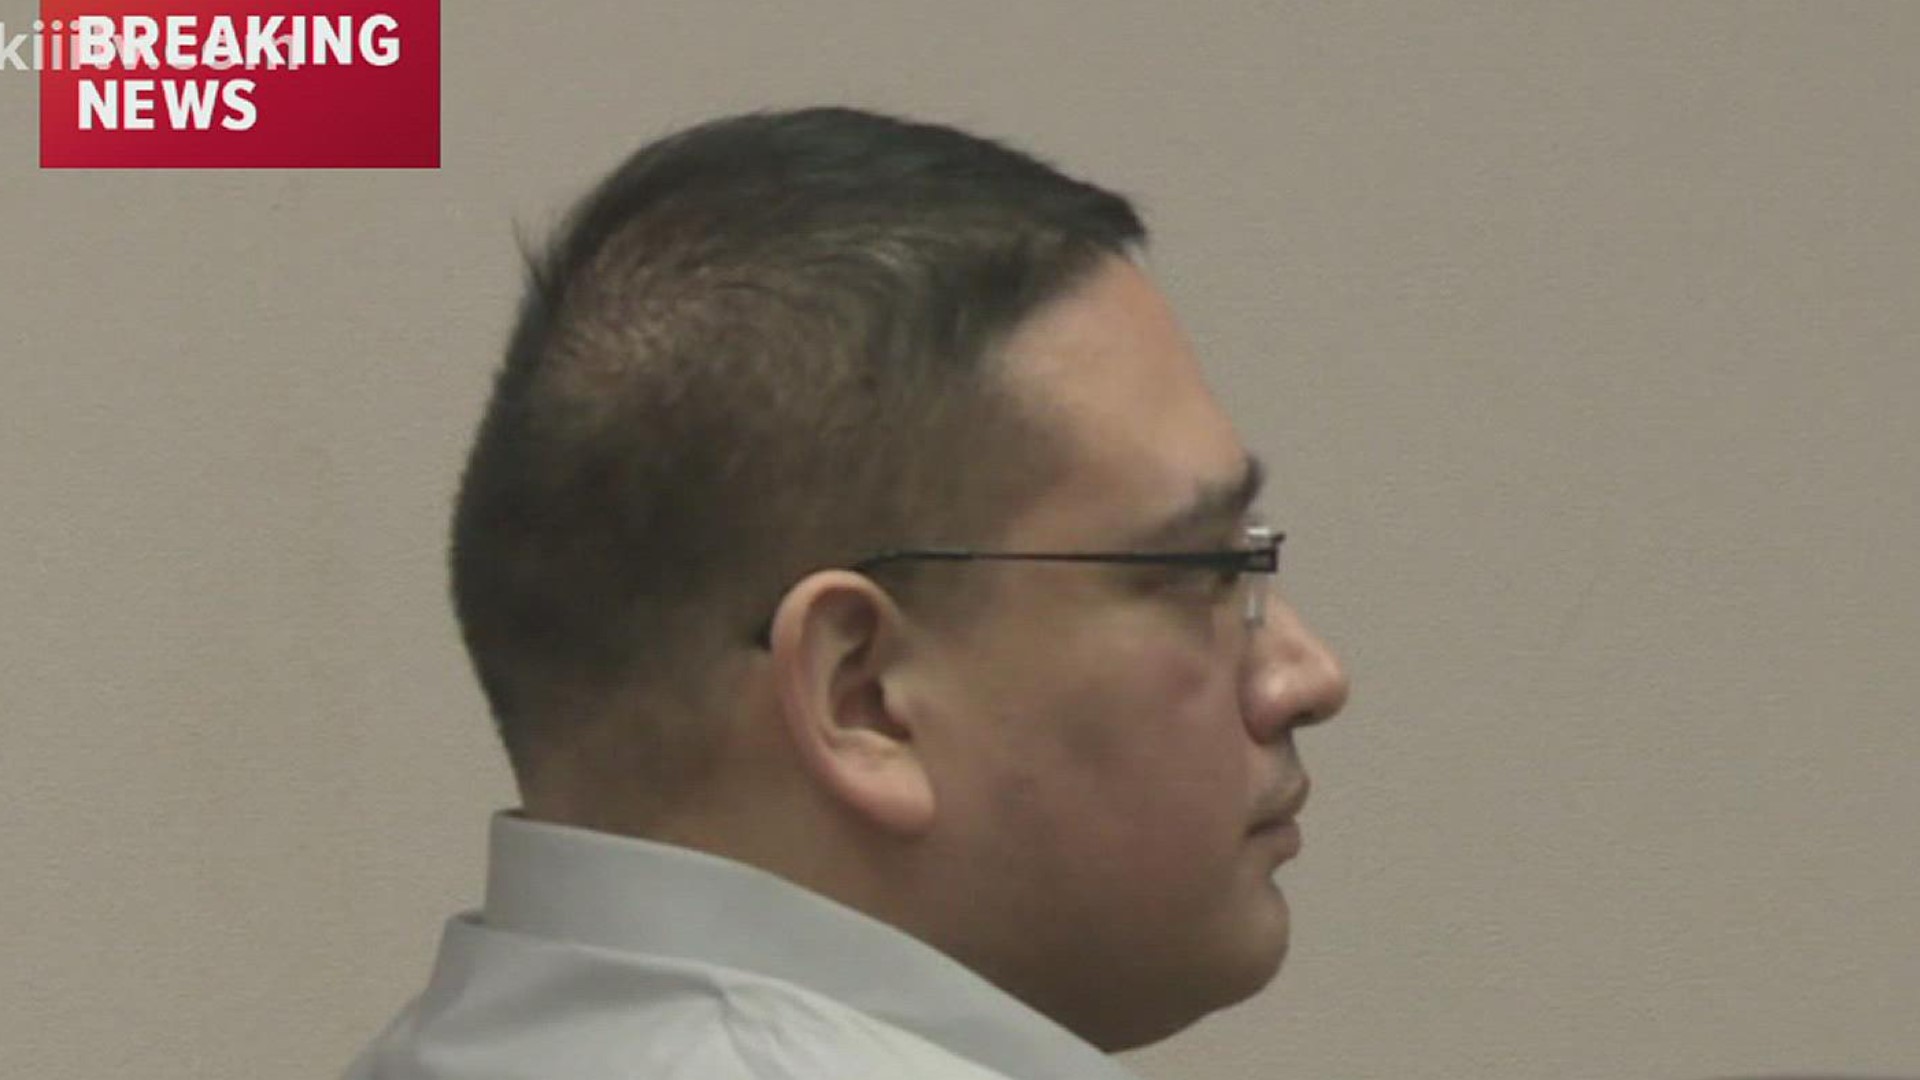 According to Nueces County District Attorney Mark Gonzalez, Portillo was found guilty Friday afternoon.